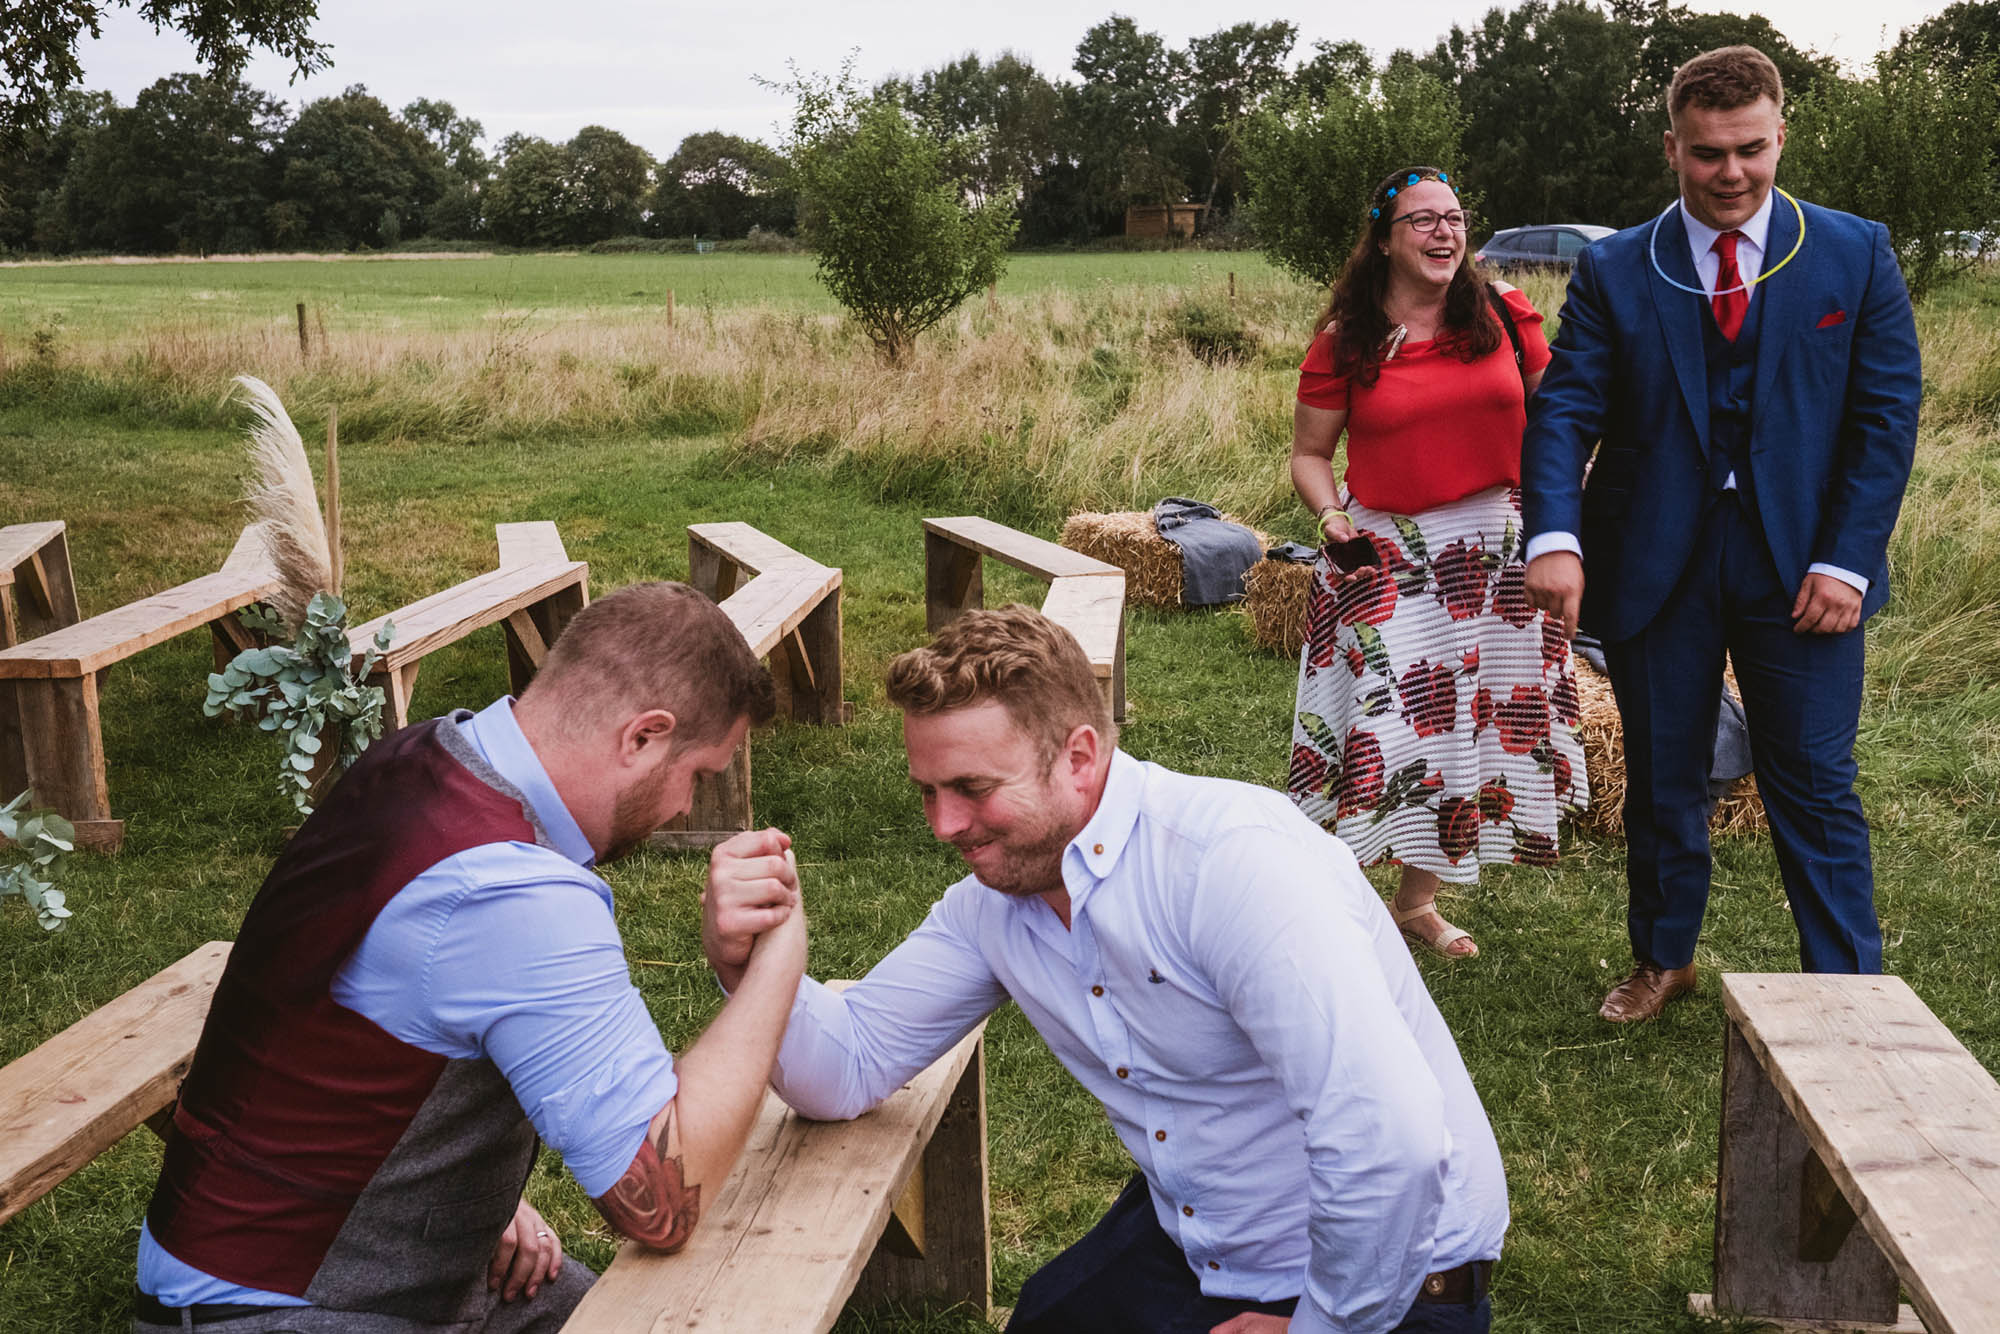 Wedding photography doesn't have to be boring! Sian & Sam's guests make an adventure out of their Hertfordshire glamping wedding! With York Place Studios Photography